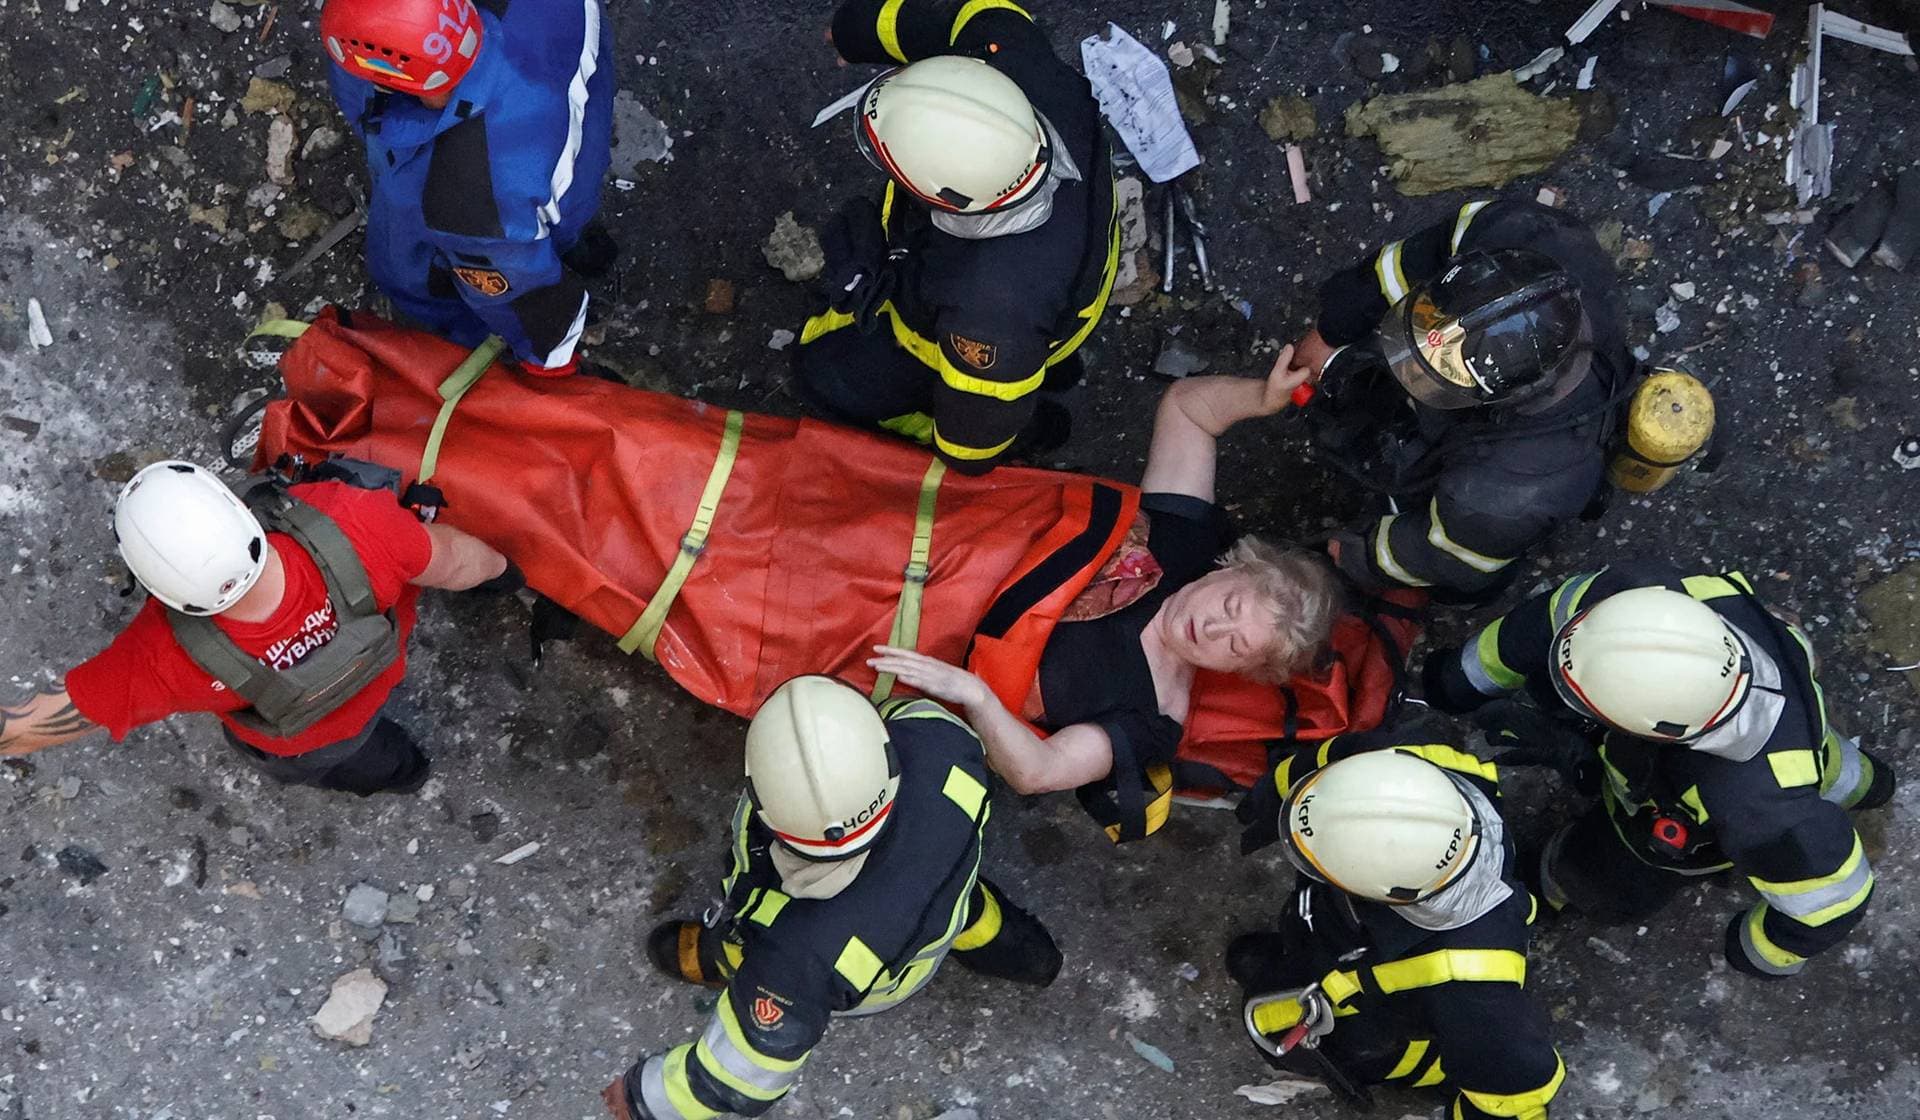 Rescuers carry a woman extricated from debris at the site of an apartment building damaged during Russian missile strikes in Kyiv